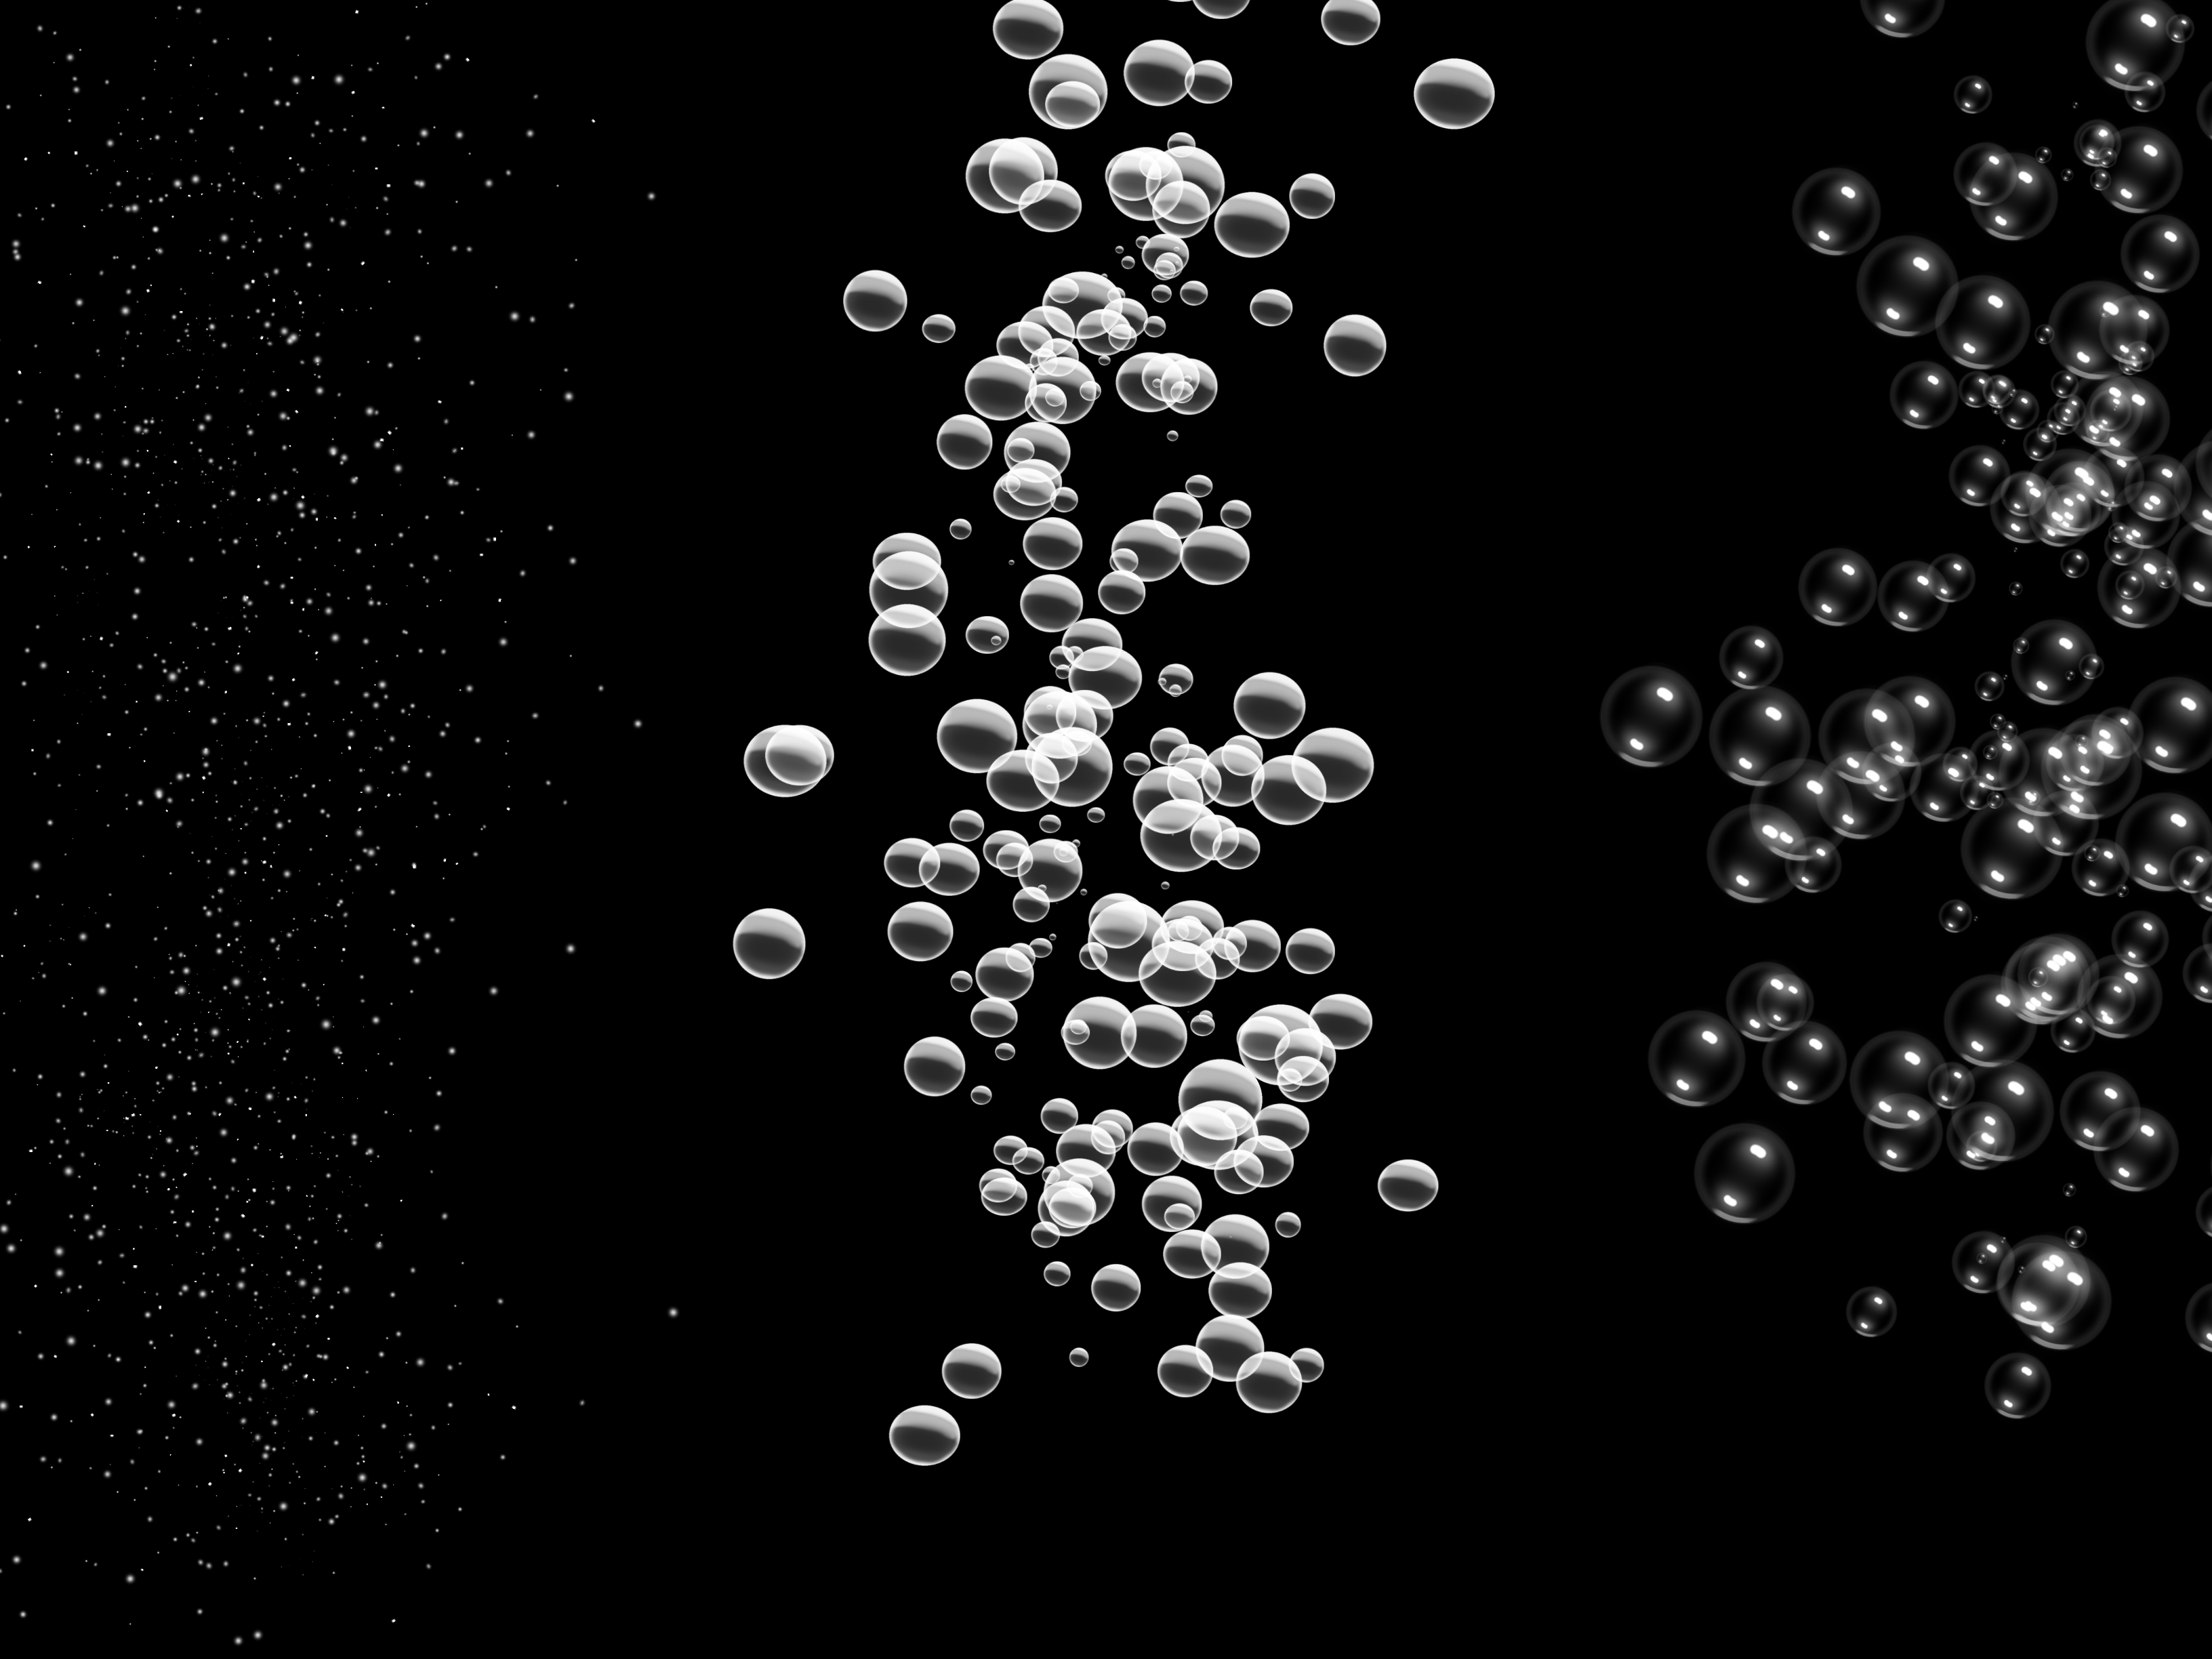 Stars and Bubbles Brushes.